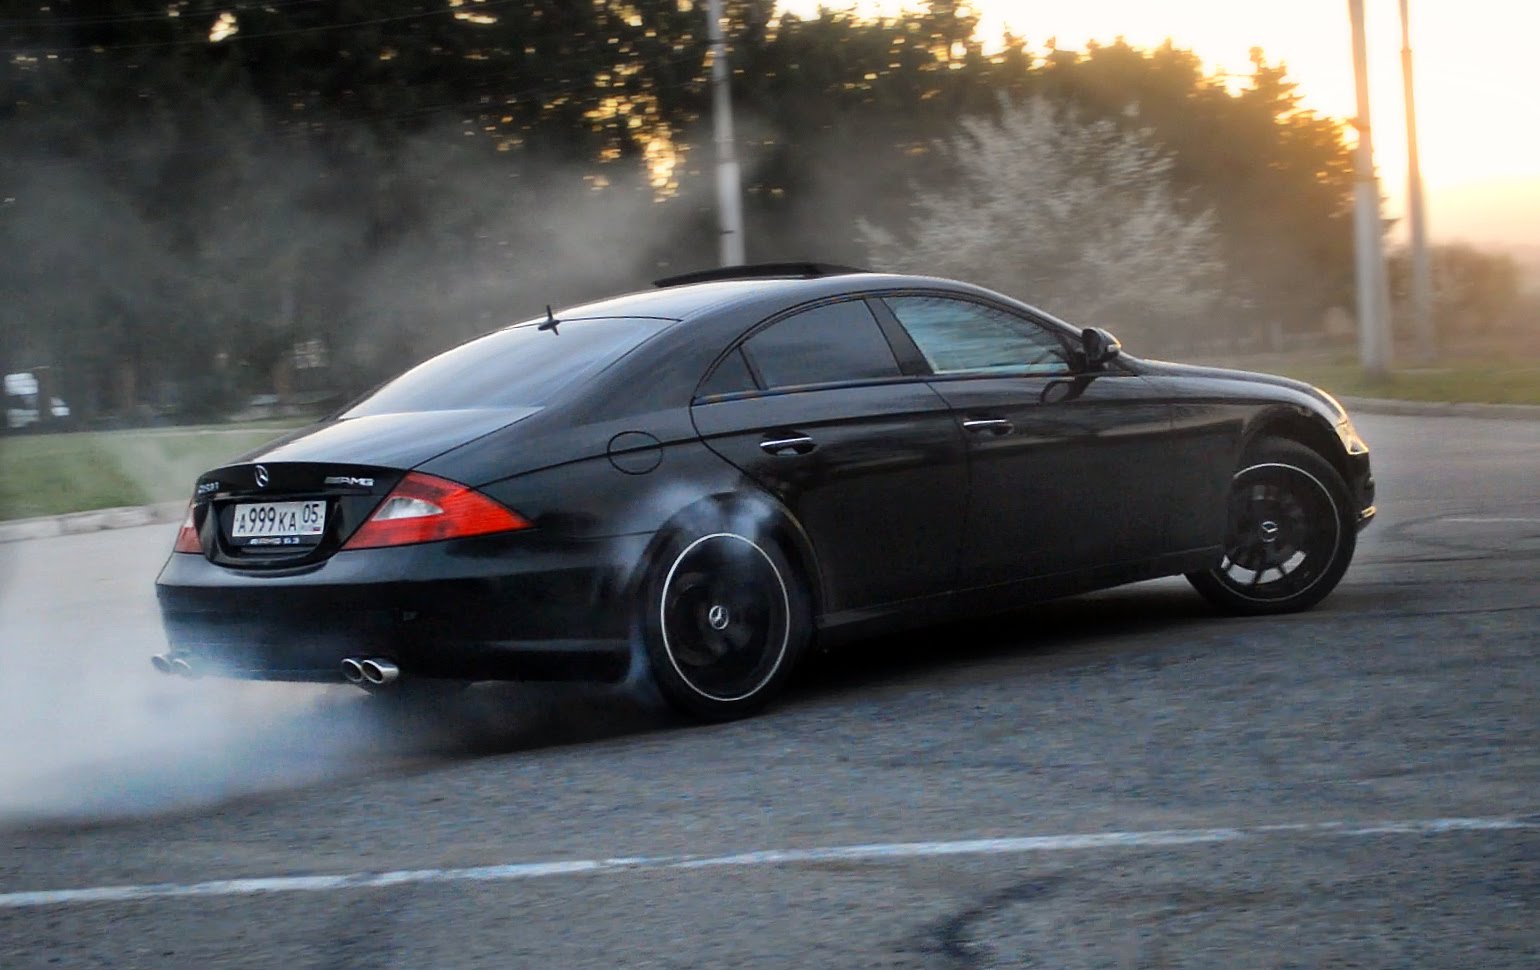 HQ Mercedes-benz Cls 55 Amg Wallpapers | File 205.33Kb